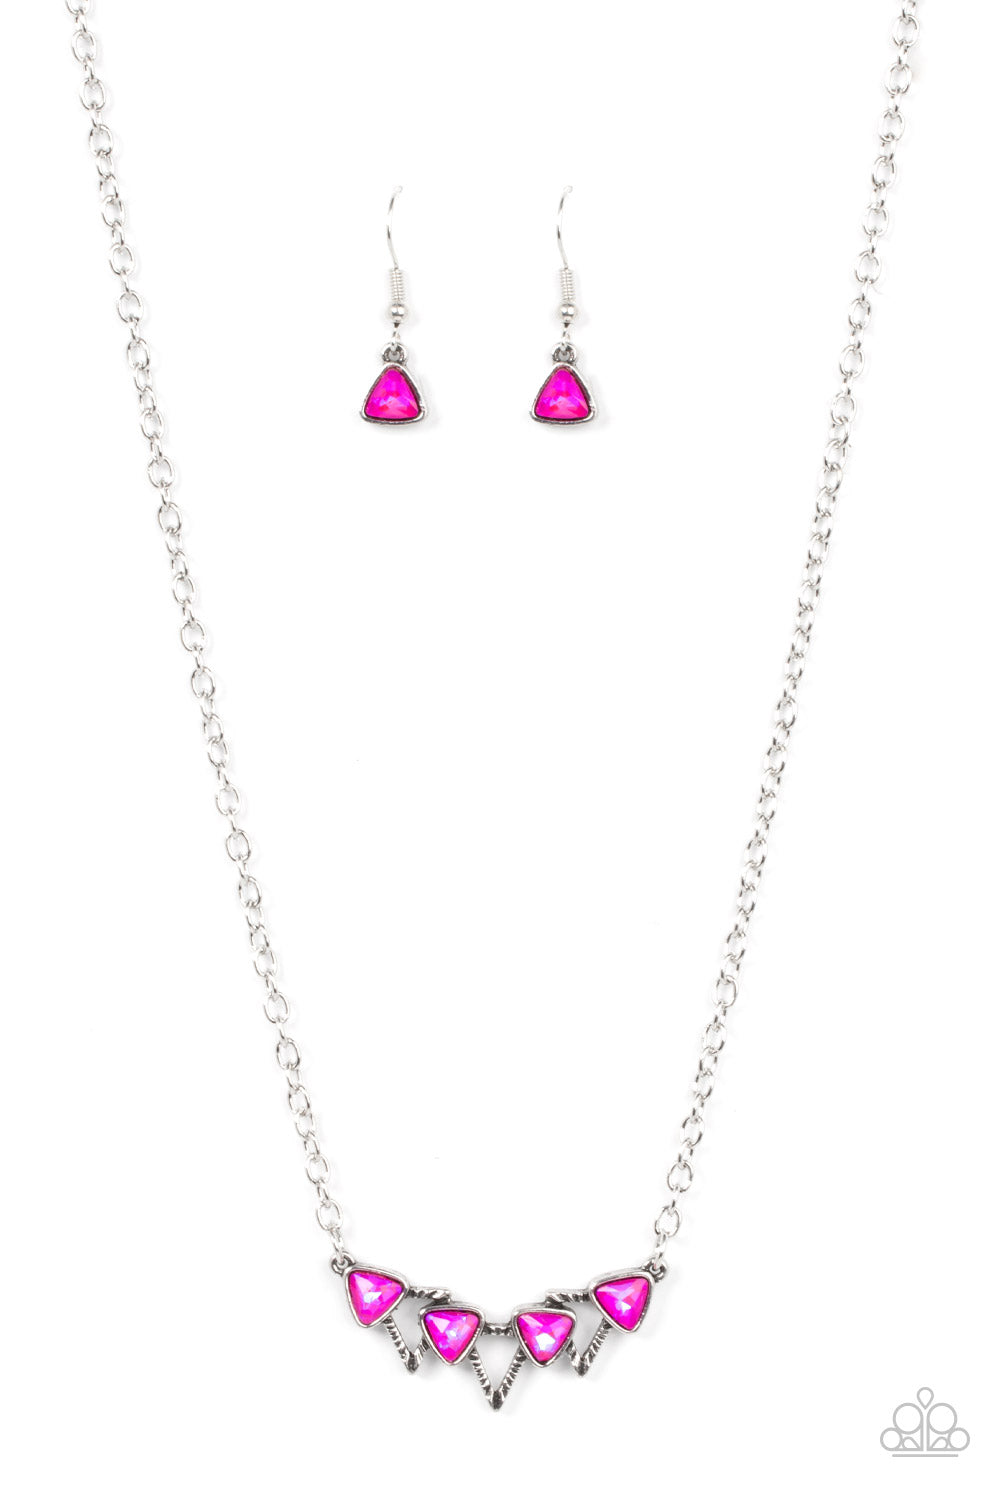 Pyramid Prowl - pink - Paparazzi necklace